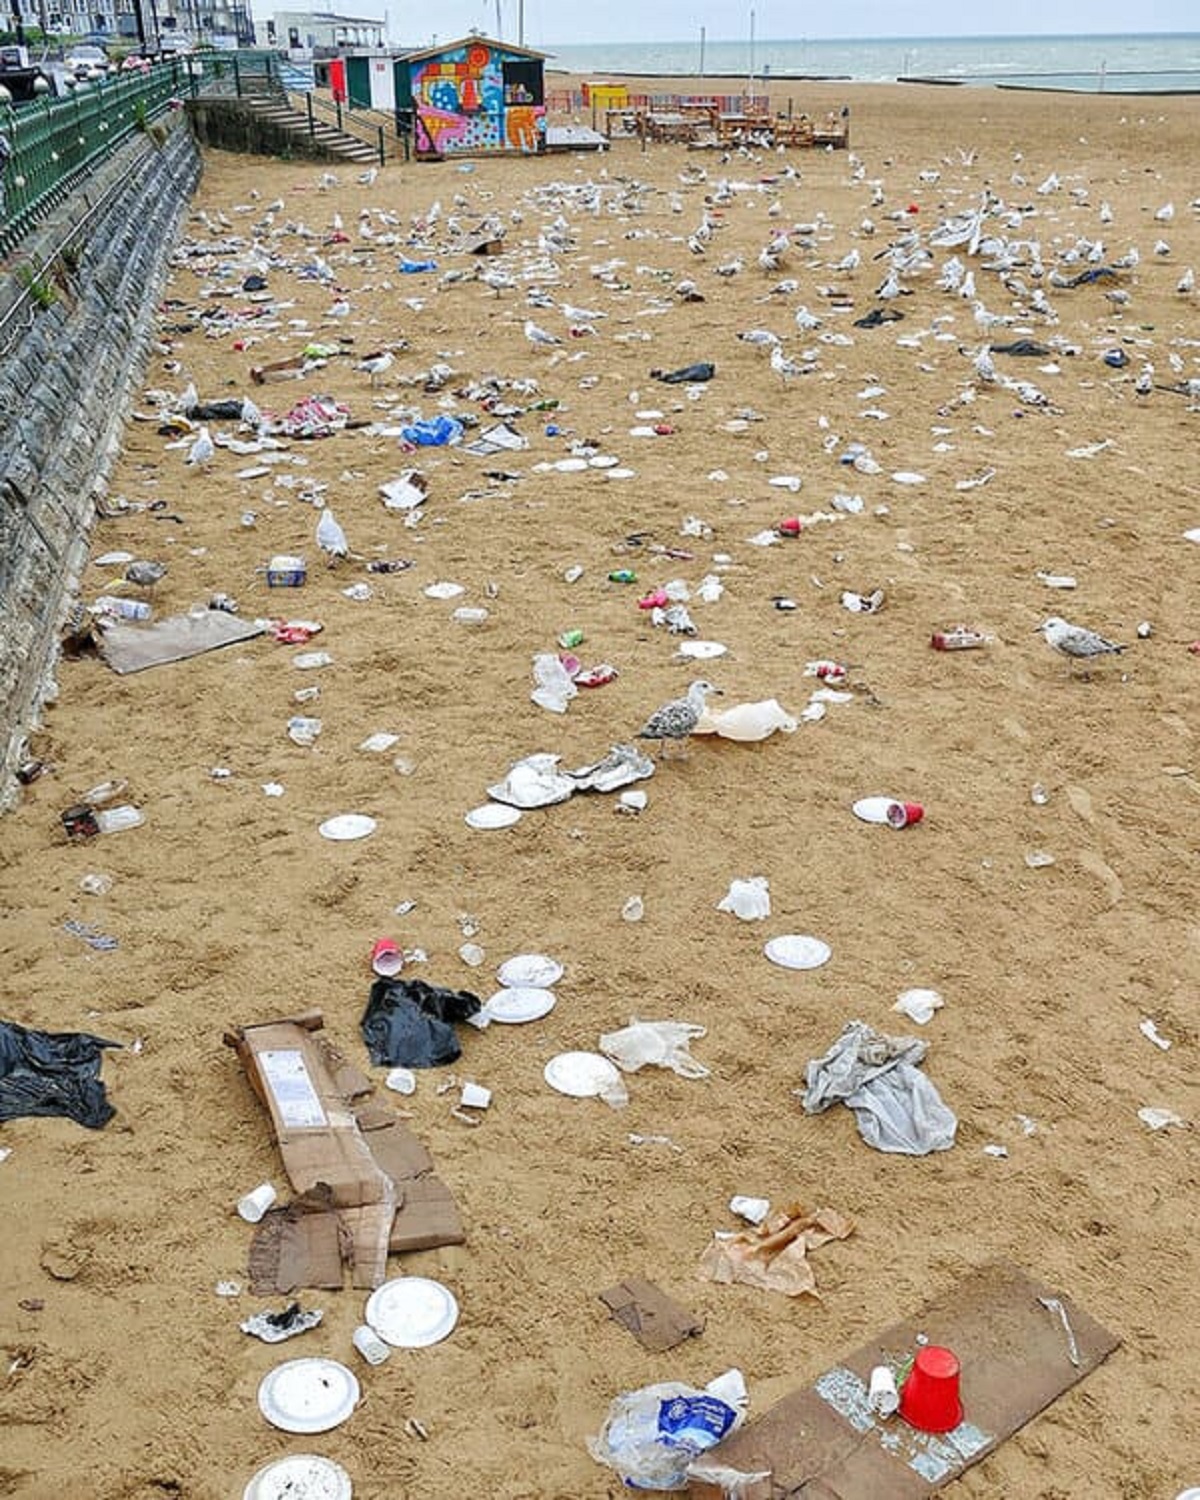 “I Went To Snap The Beach At Margate And Wish I Hadn’t. Is It Because The Council Are Not Putting Bins On The Beach, Or Is Lazy Visitors At Fault? Either Way It’s An Utter Disgrace”